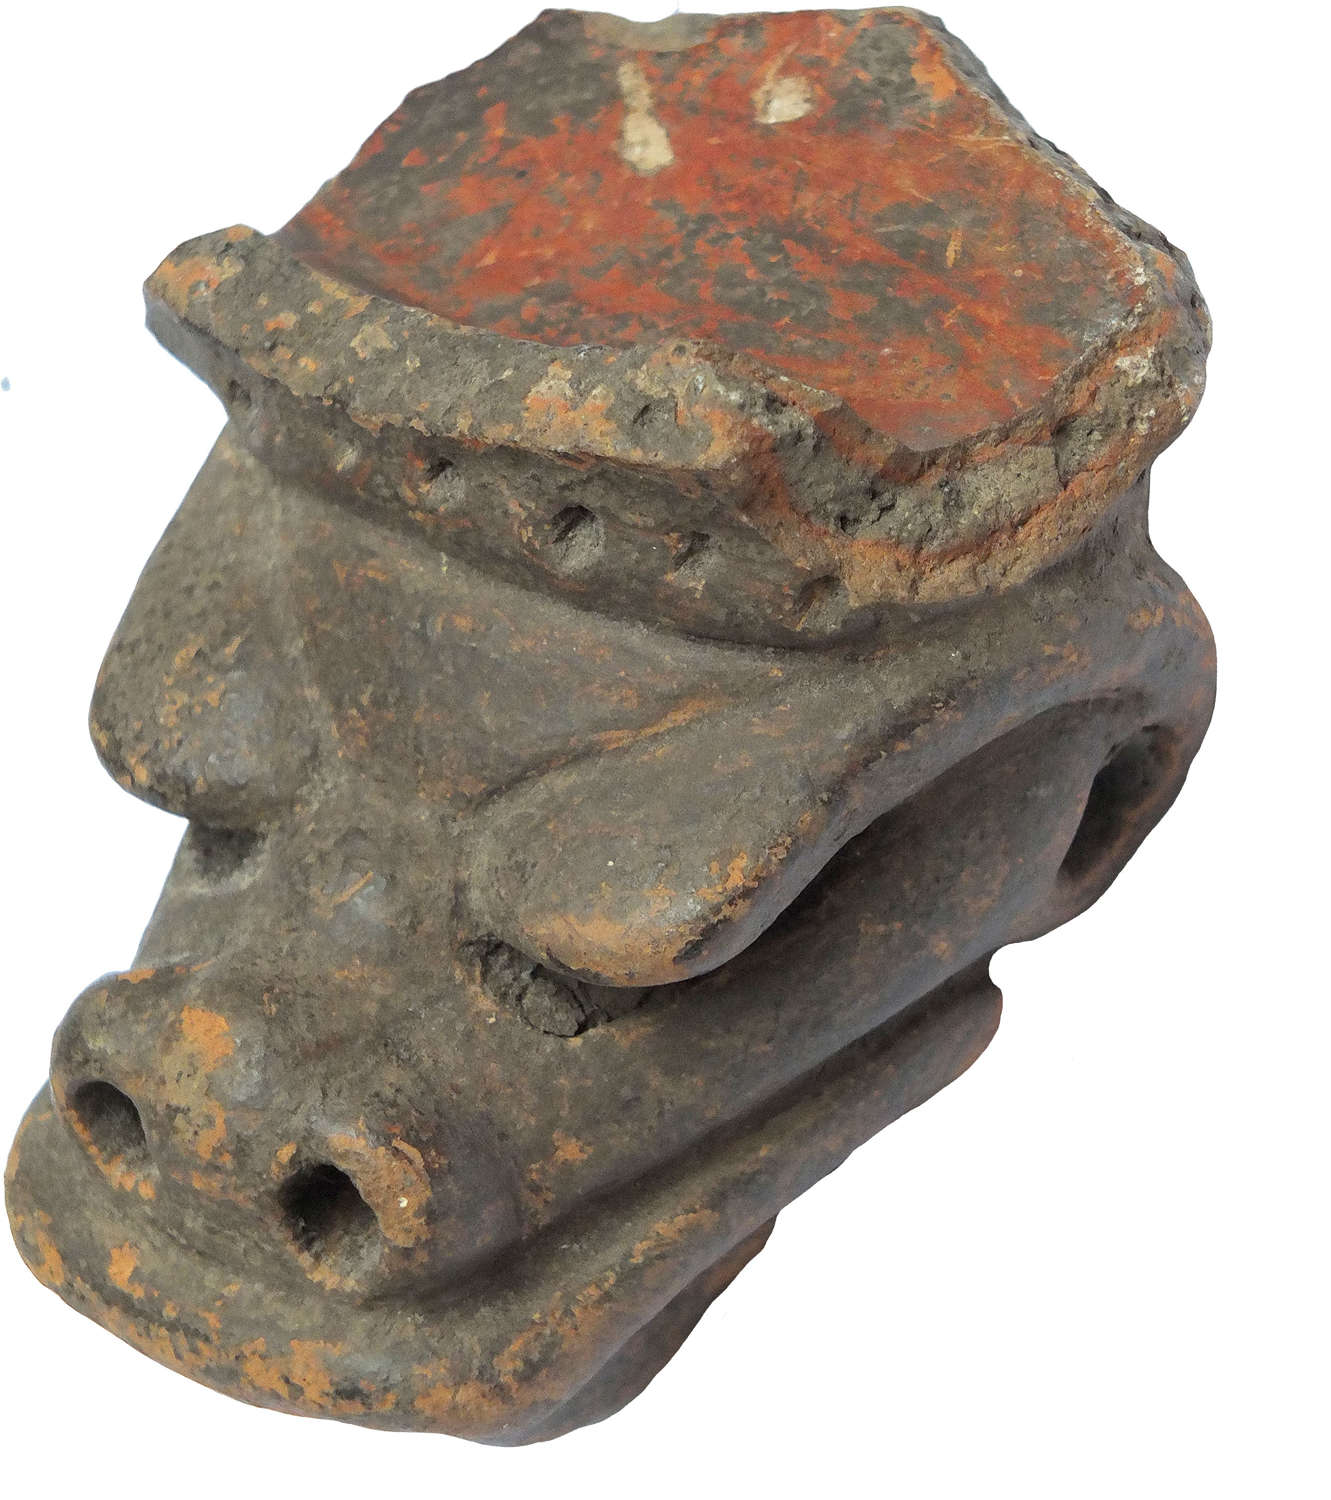 A Mayan zoomorphic foot from a footed bowl, c. 1st Millennium A.D.